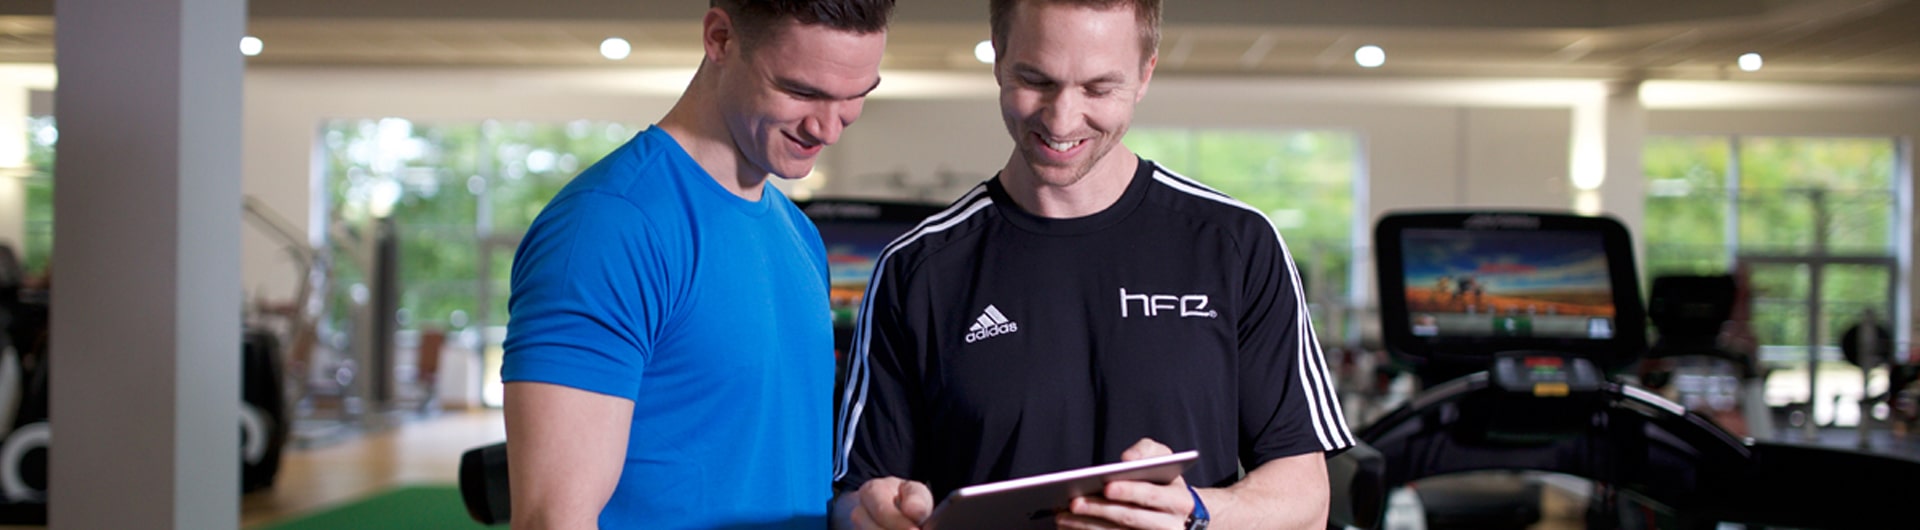 A personal trainer showing a client an app on an iPad tablet.